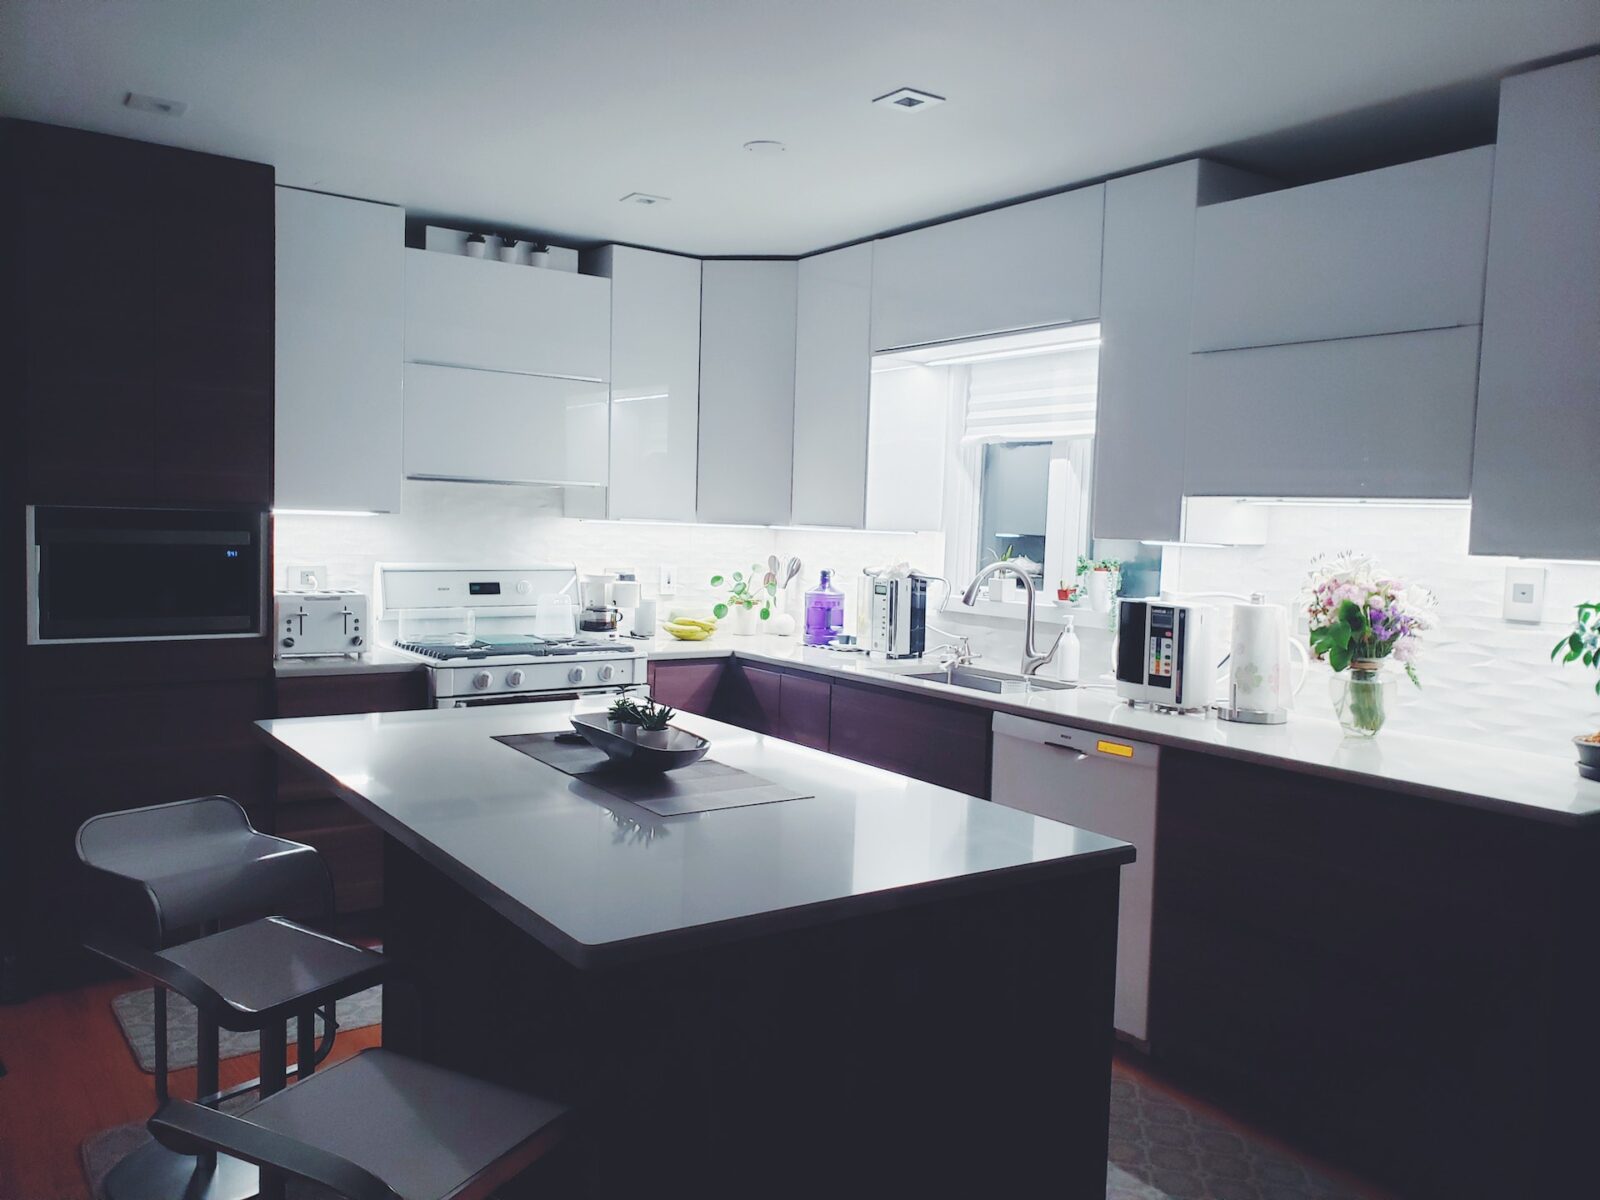 Major Considerations When Designing Your Dream Kitchen